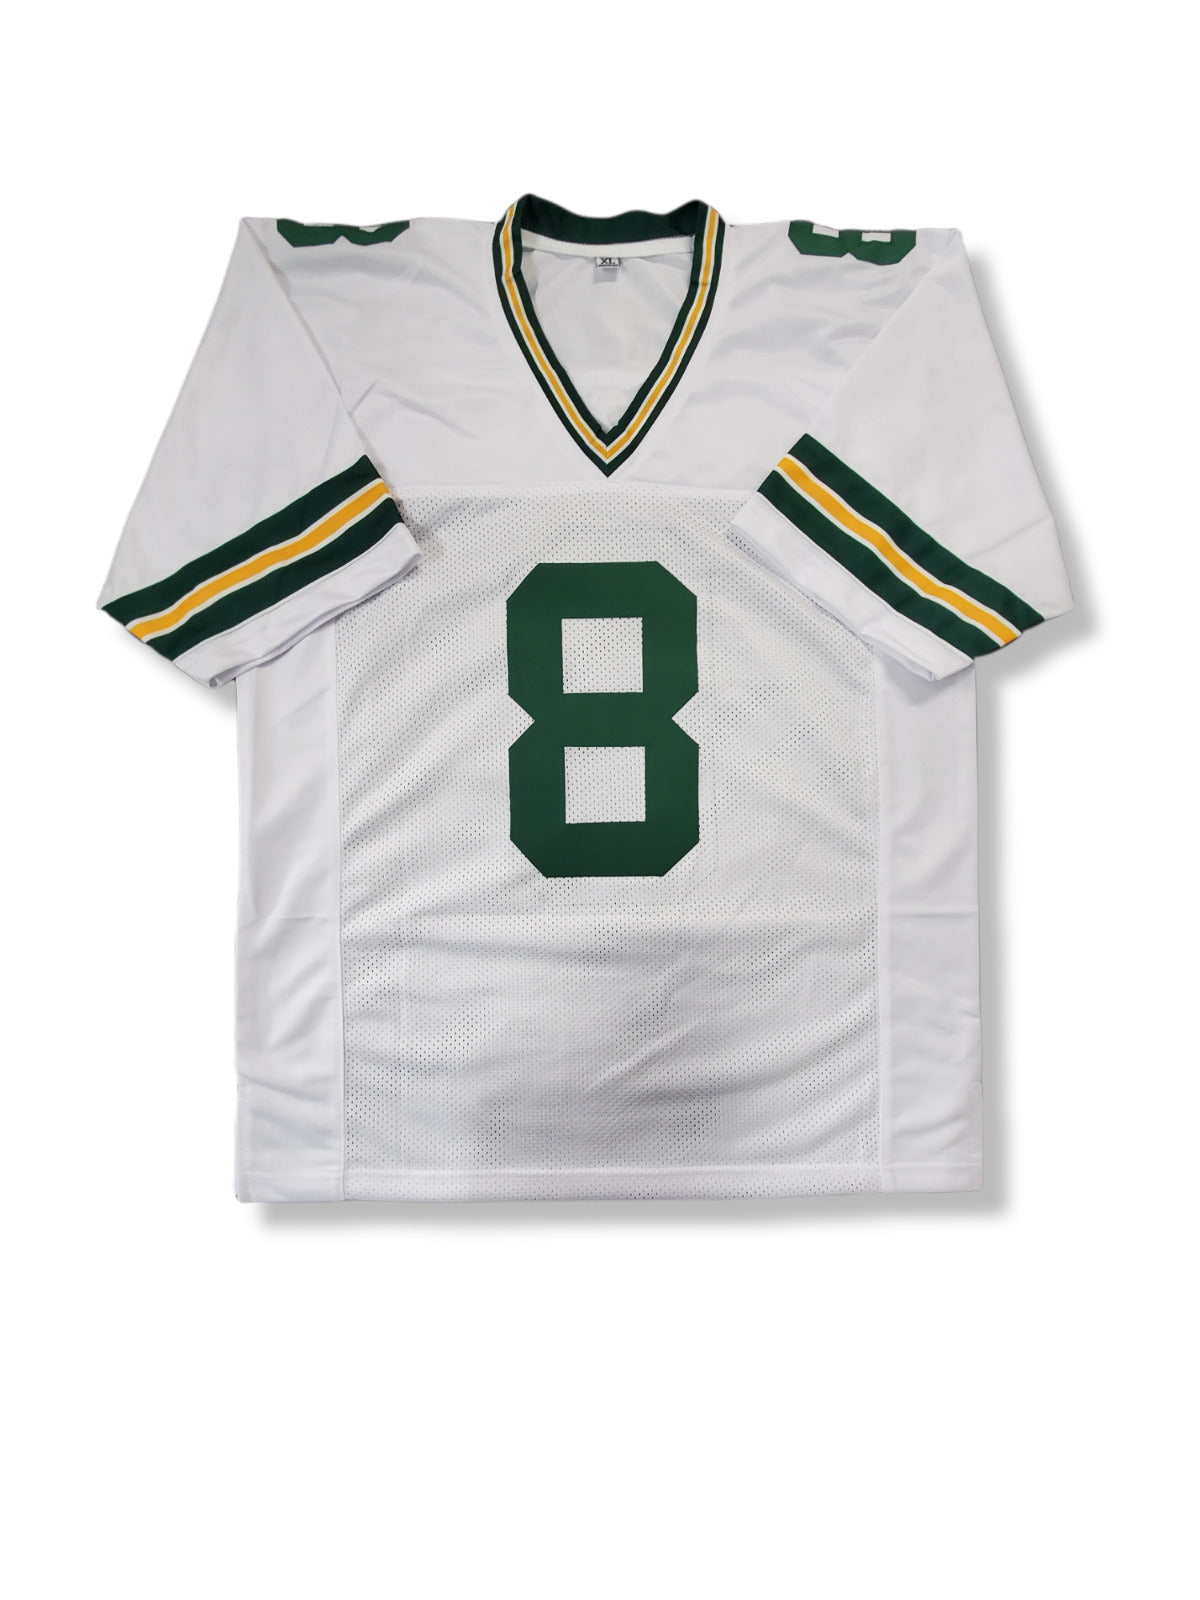 MVP Authentics Green Bay Packers Amari Rodgers Autographed Signed Jersey Jsa Coa 121.50 sports jersey framing , jersey framing